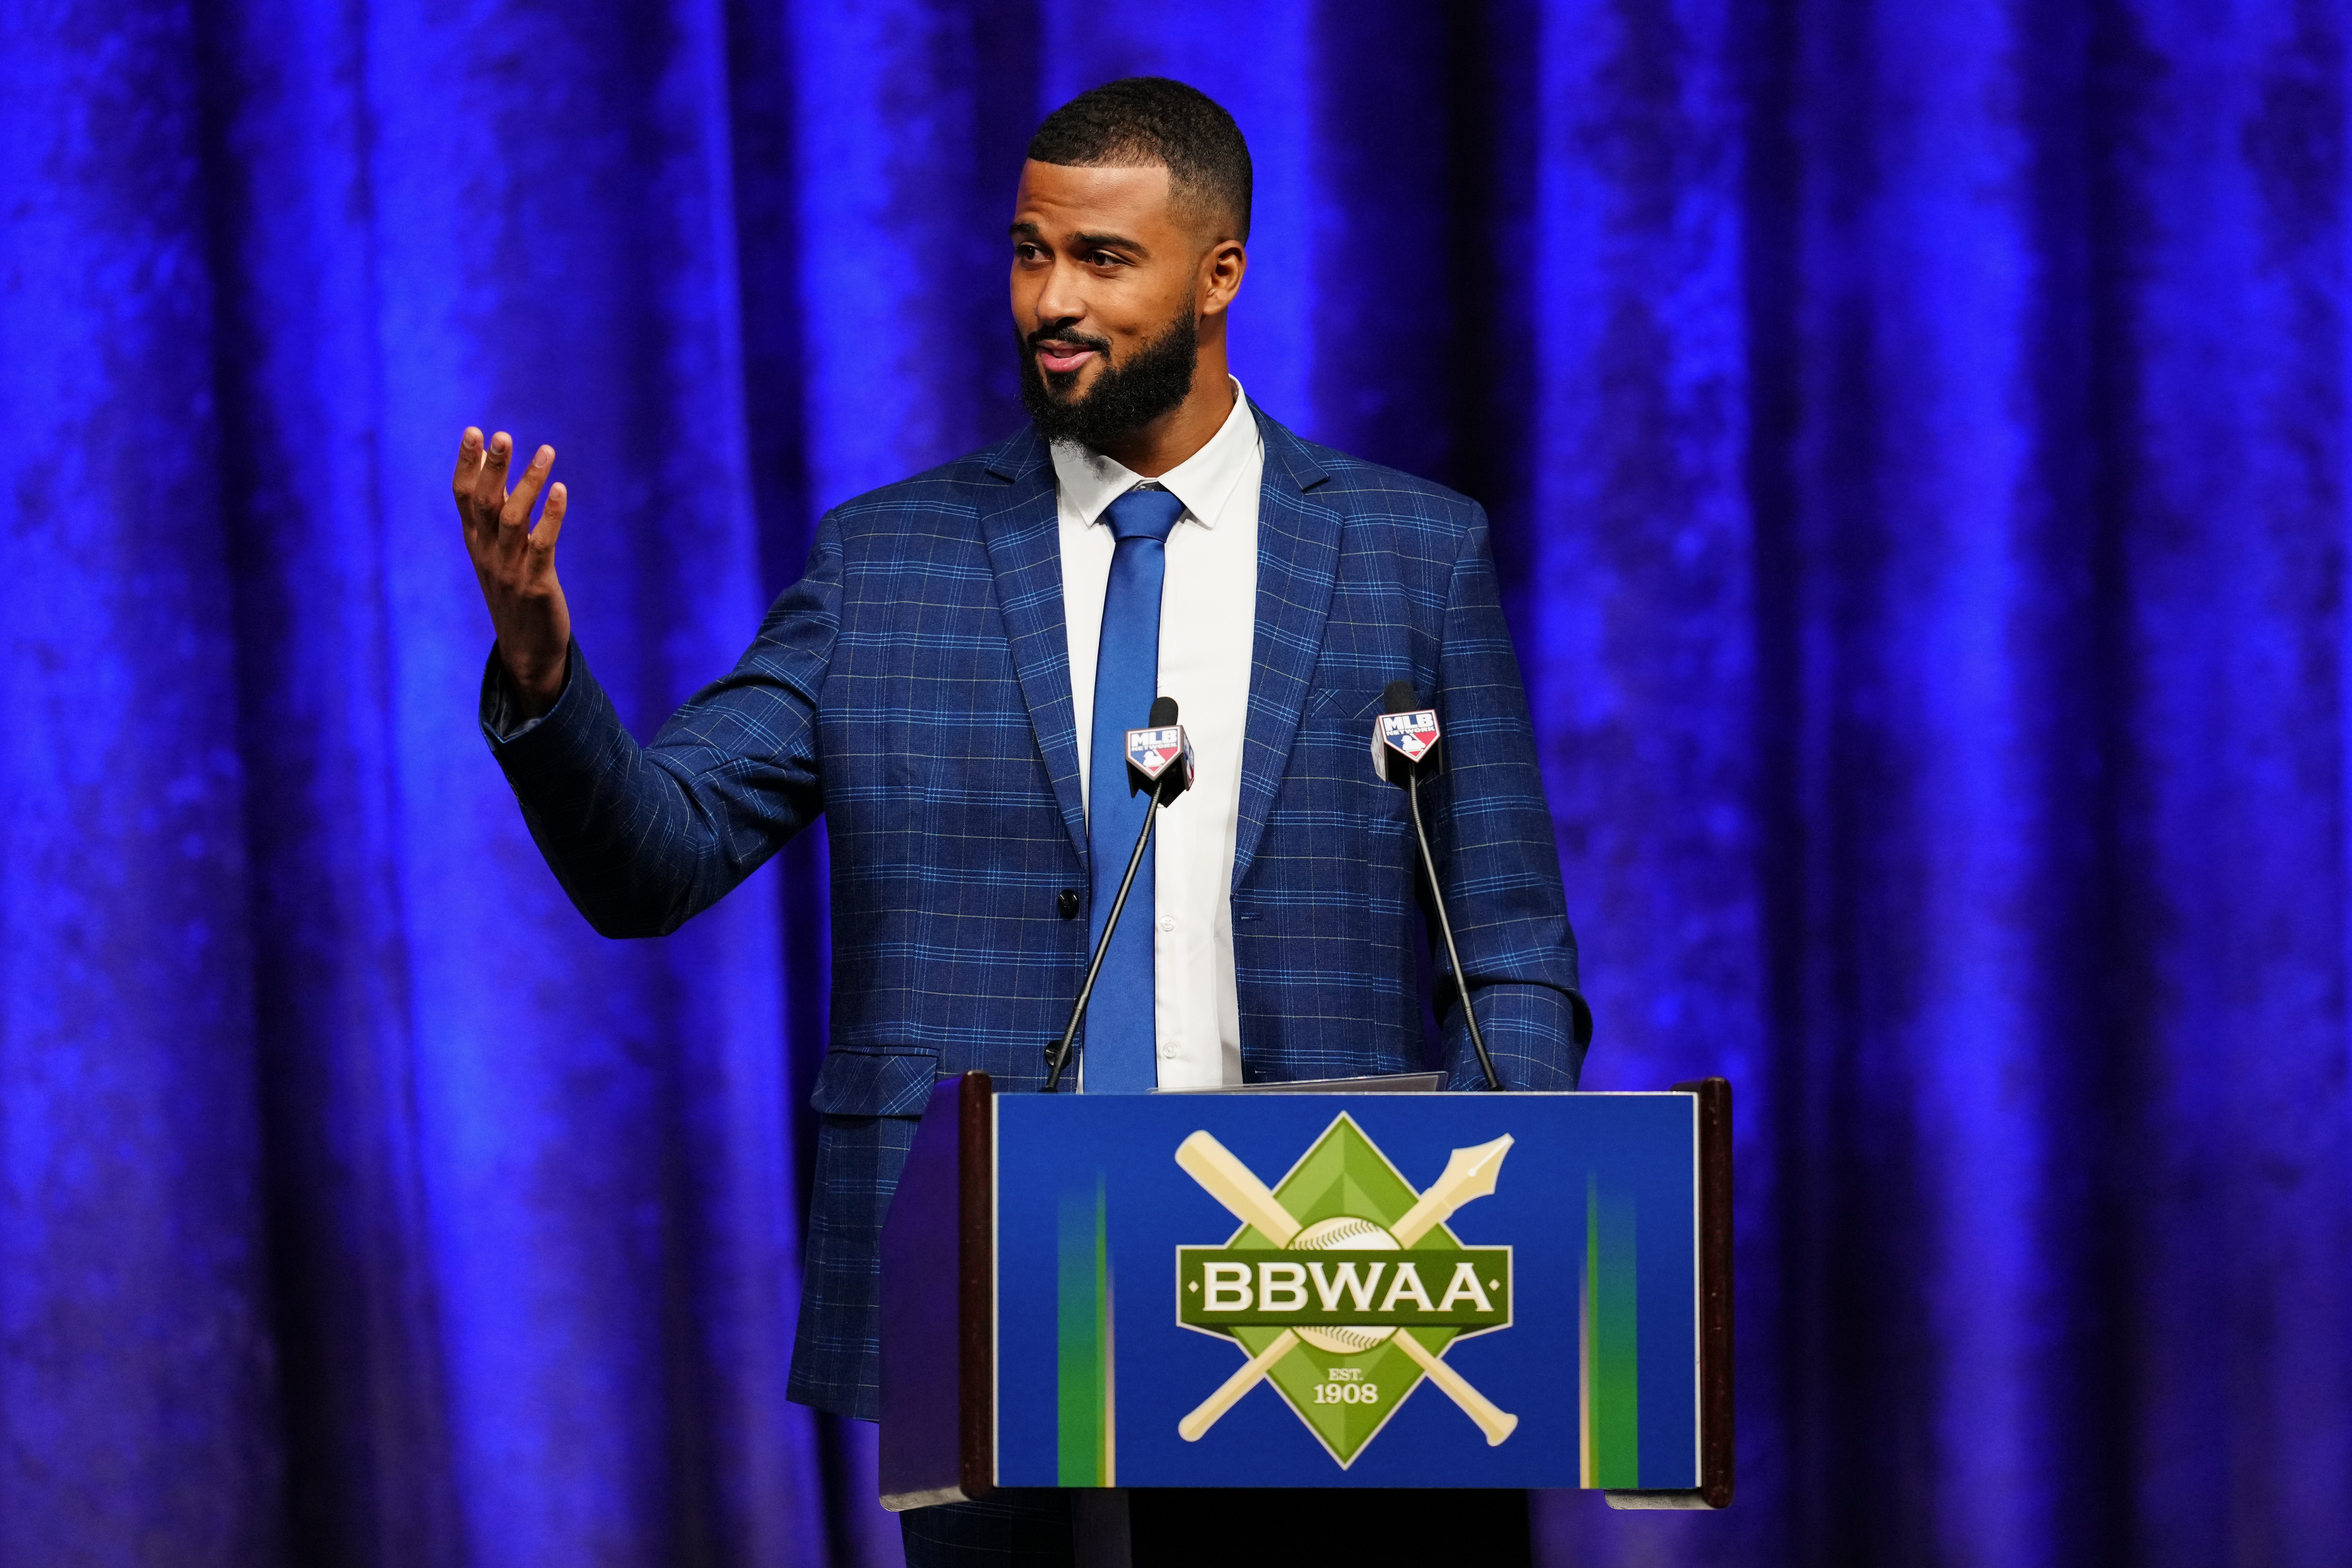 Sandy Alcantara #22 of the Miami Marlins speaks to the crowd after receiving the 2022 National League Cy Young Award during the 2023 BBWAA Awards Dinner at New York Hilton Midtown on Saturday, January 28, 2023 in New York, New York.